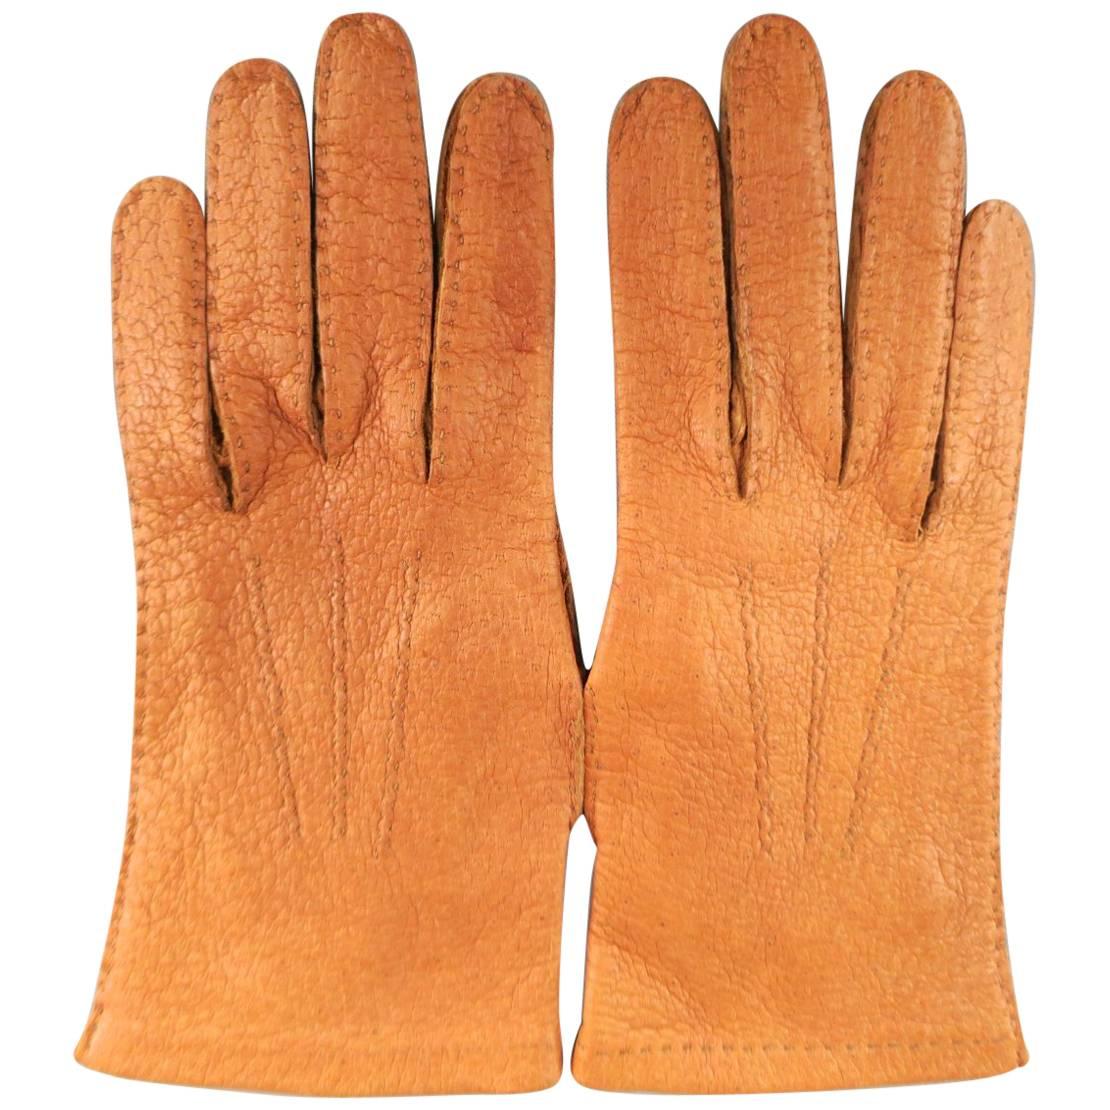 Vintage HERMES Size 7 1/2 Rust Tan Textured Peccary Leather Gloves